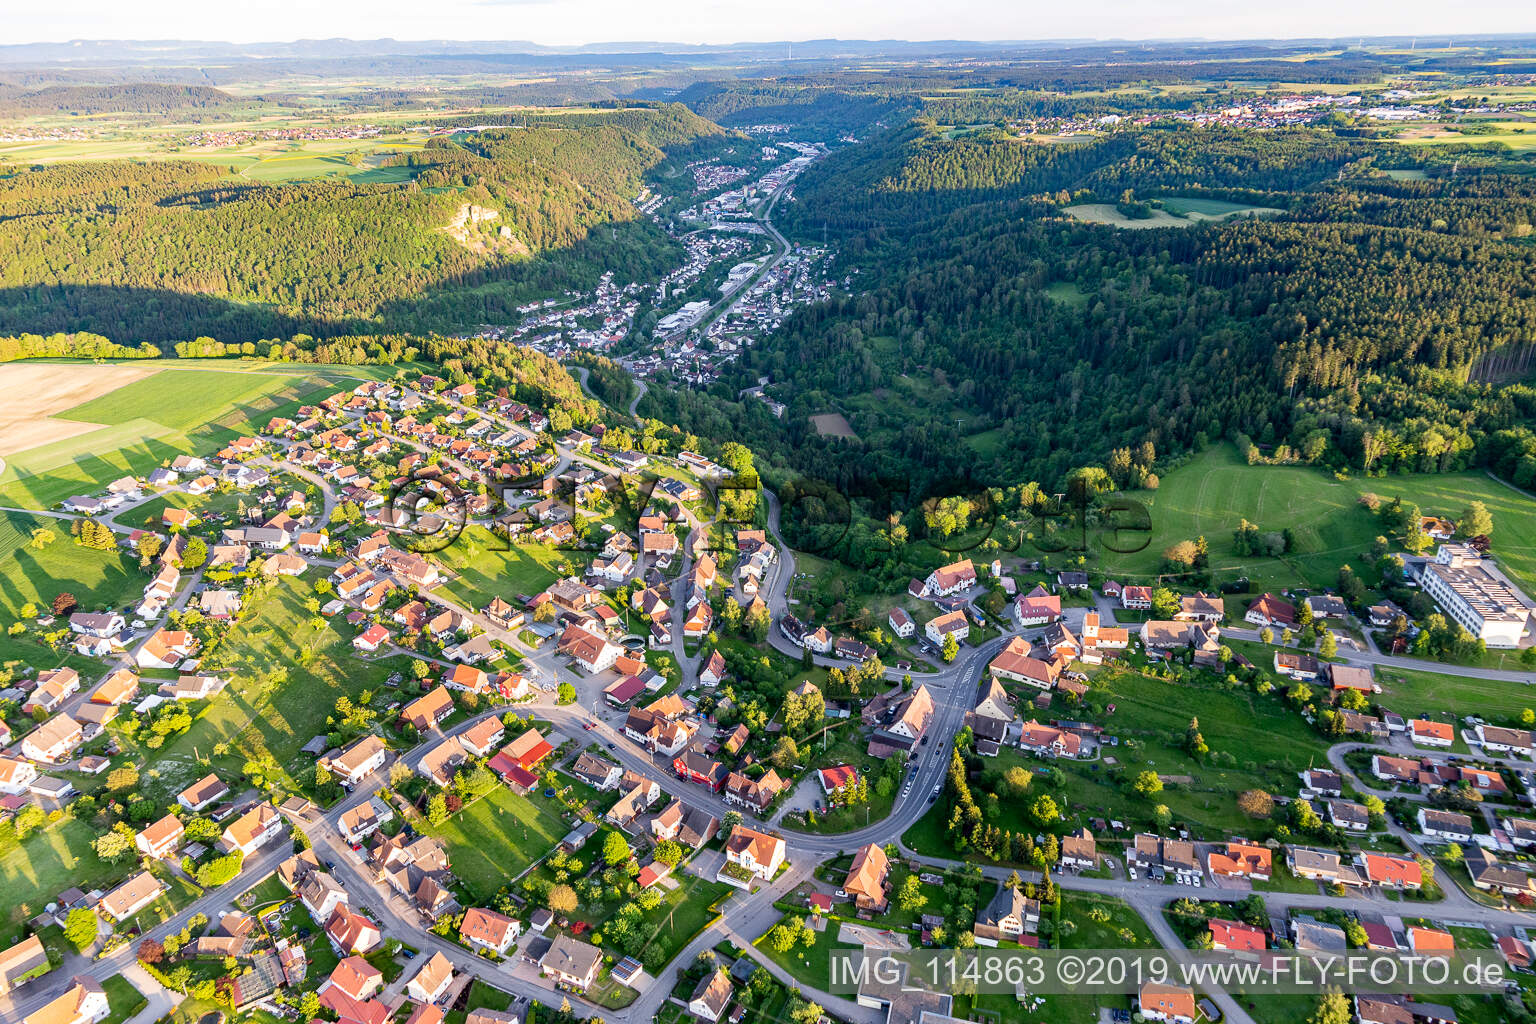 Location view of the streets and houses of residential areas in the valley landscape surrounded by mountains in Weiden in the state Baden-Wurttemberg, Germany